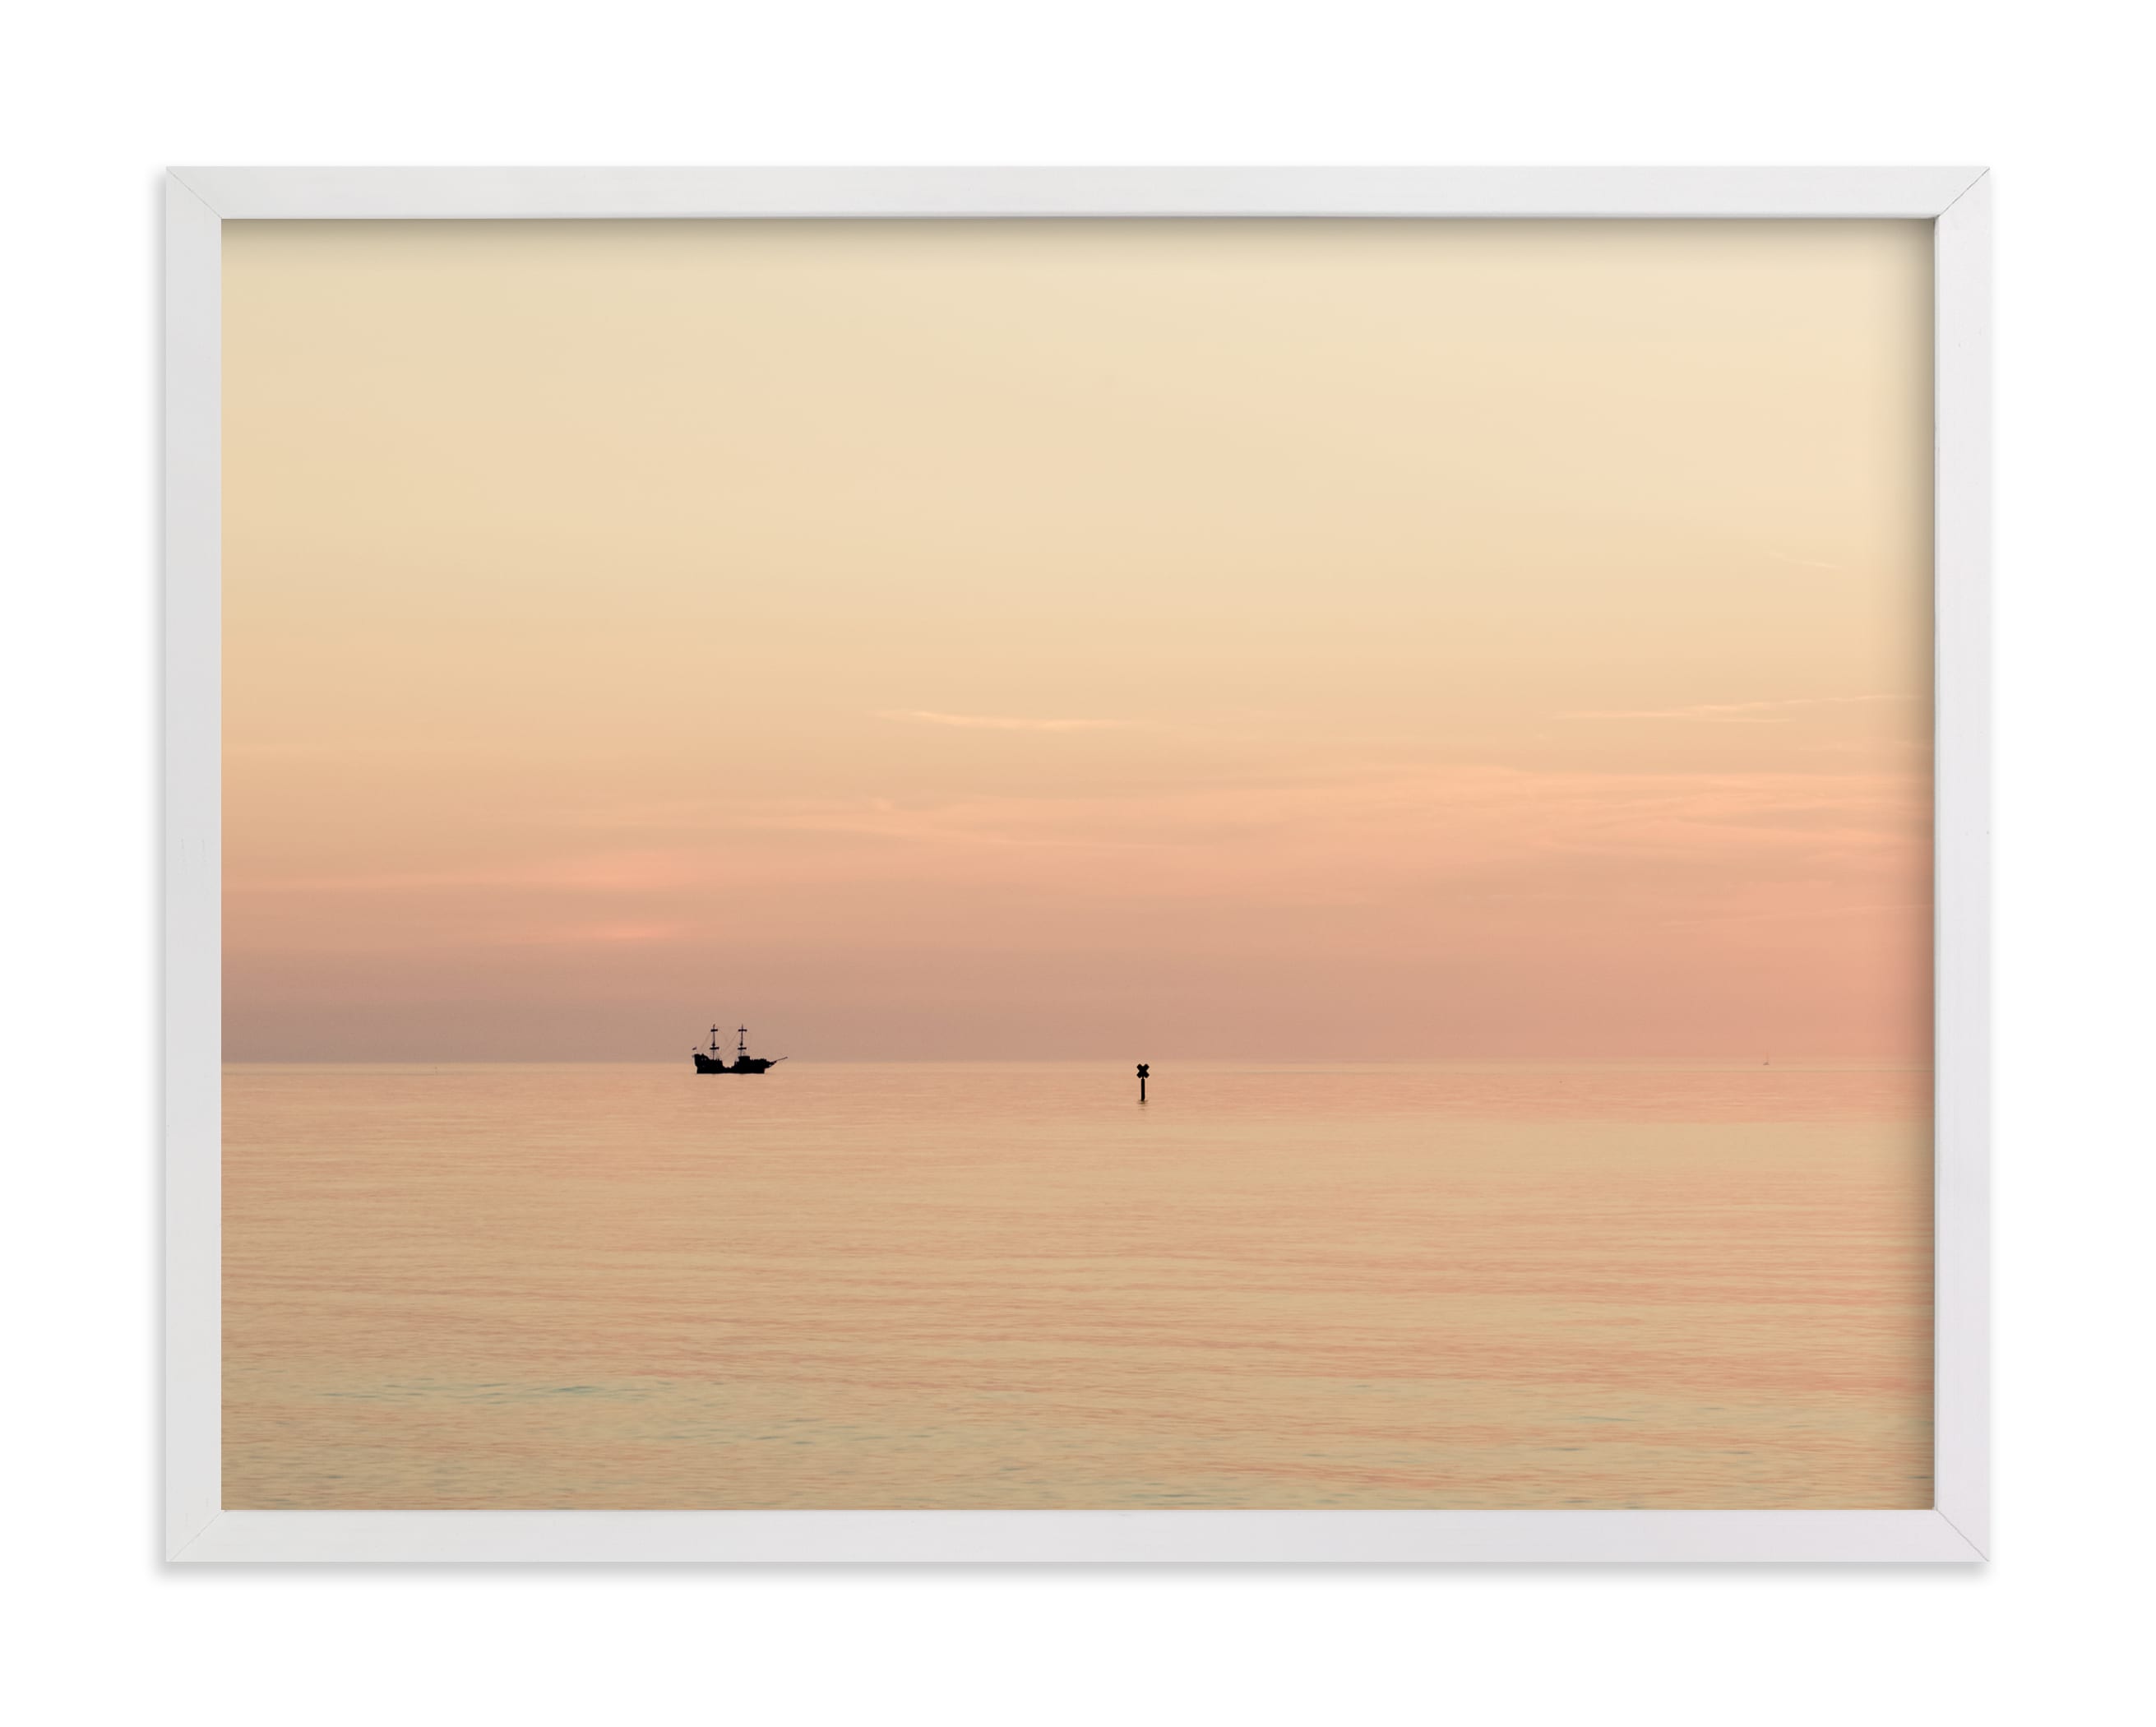 "Alone at sea I" by Lying on the grass in beautiful frame options and a variety of sizes.